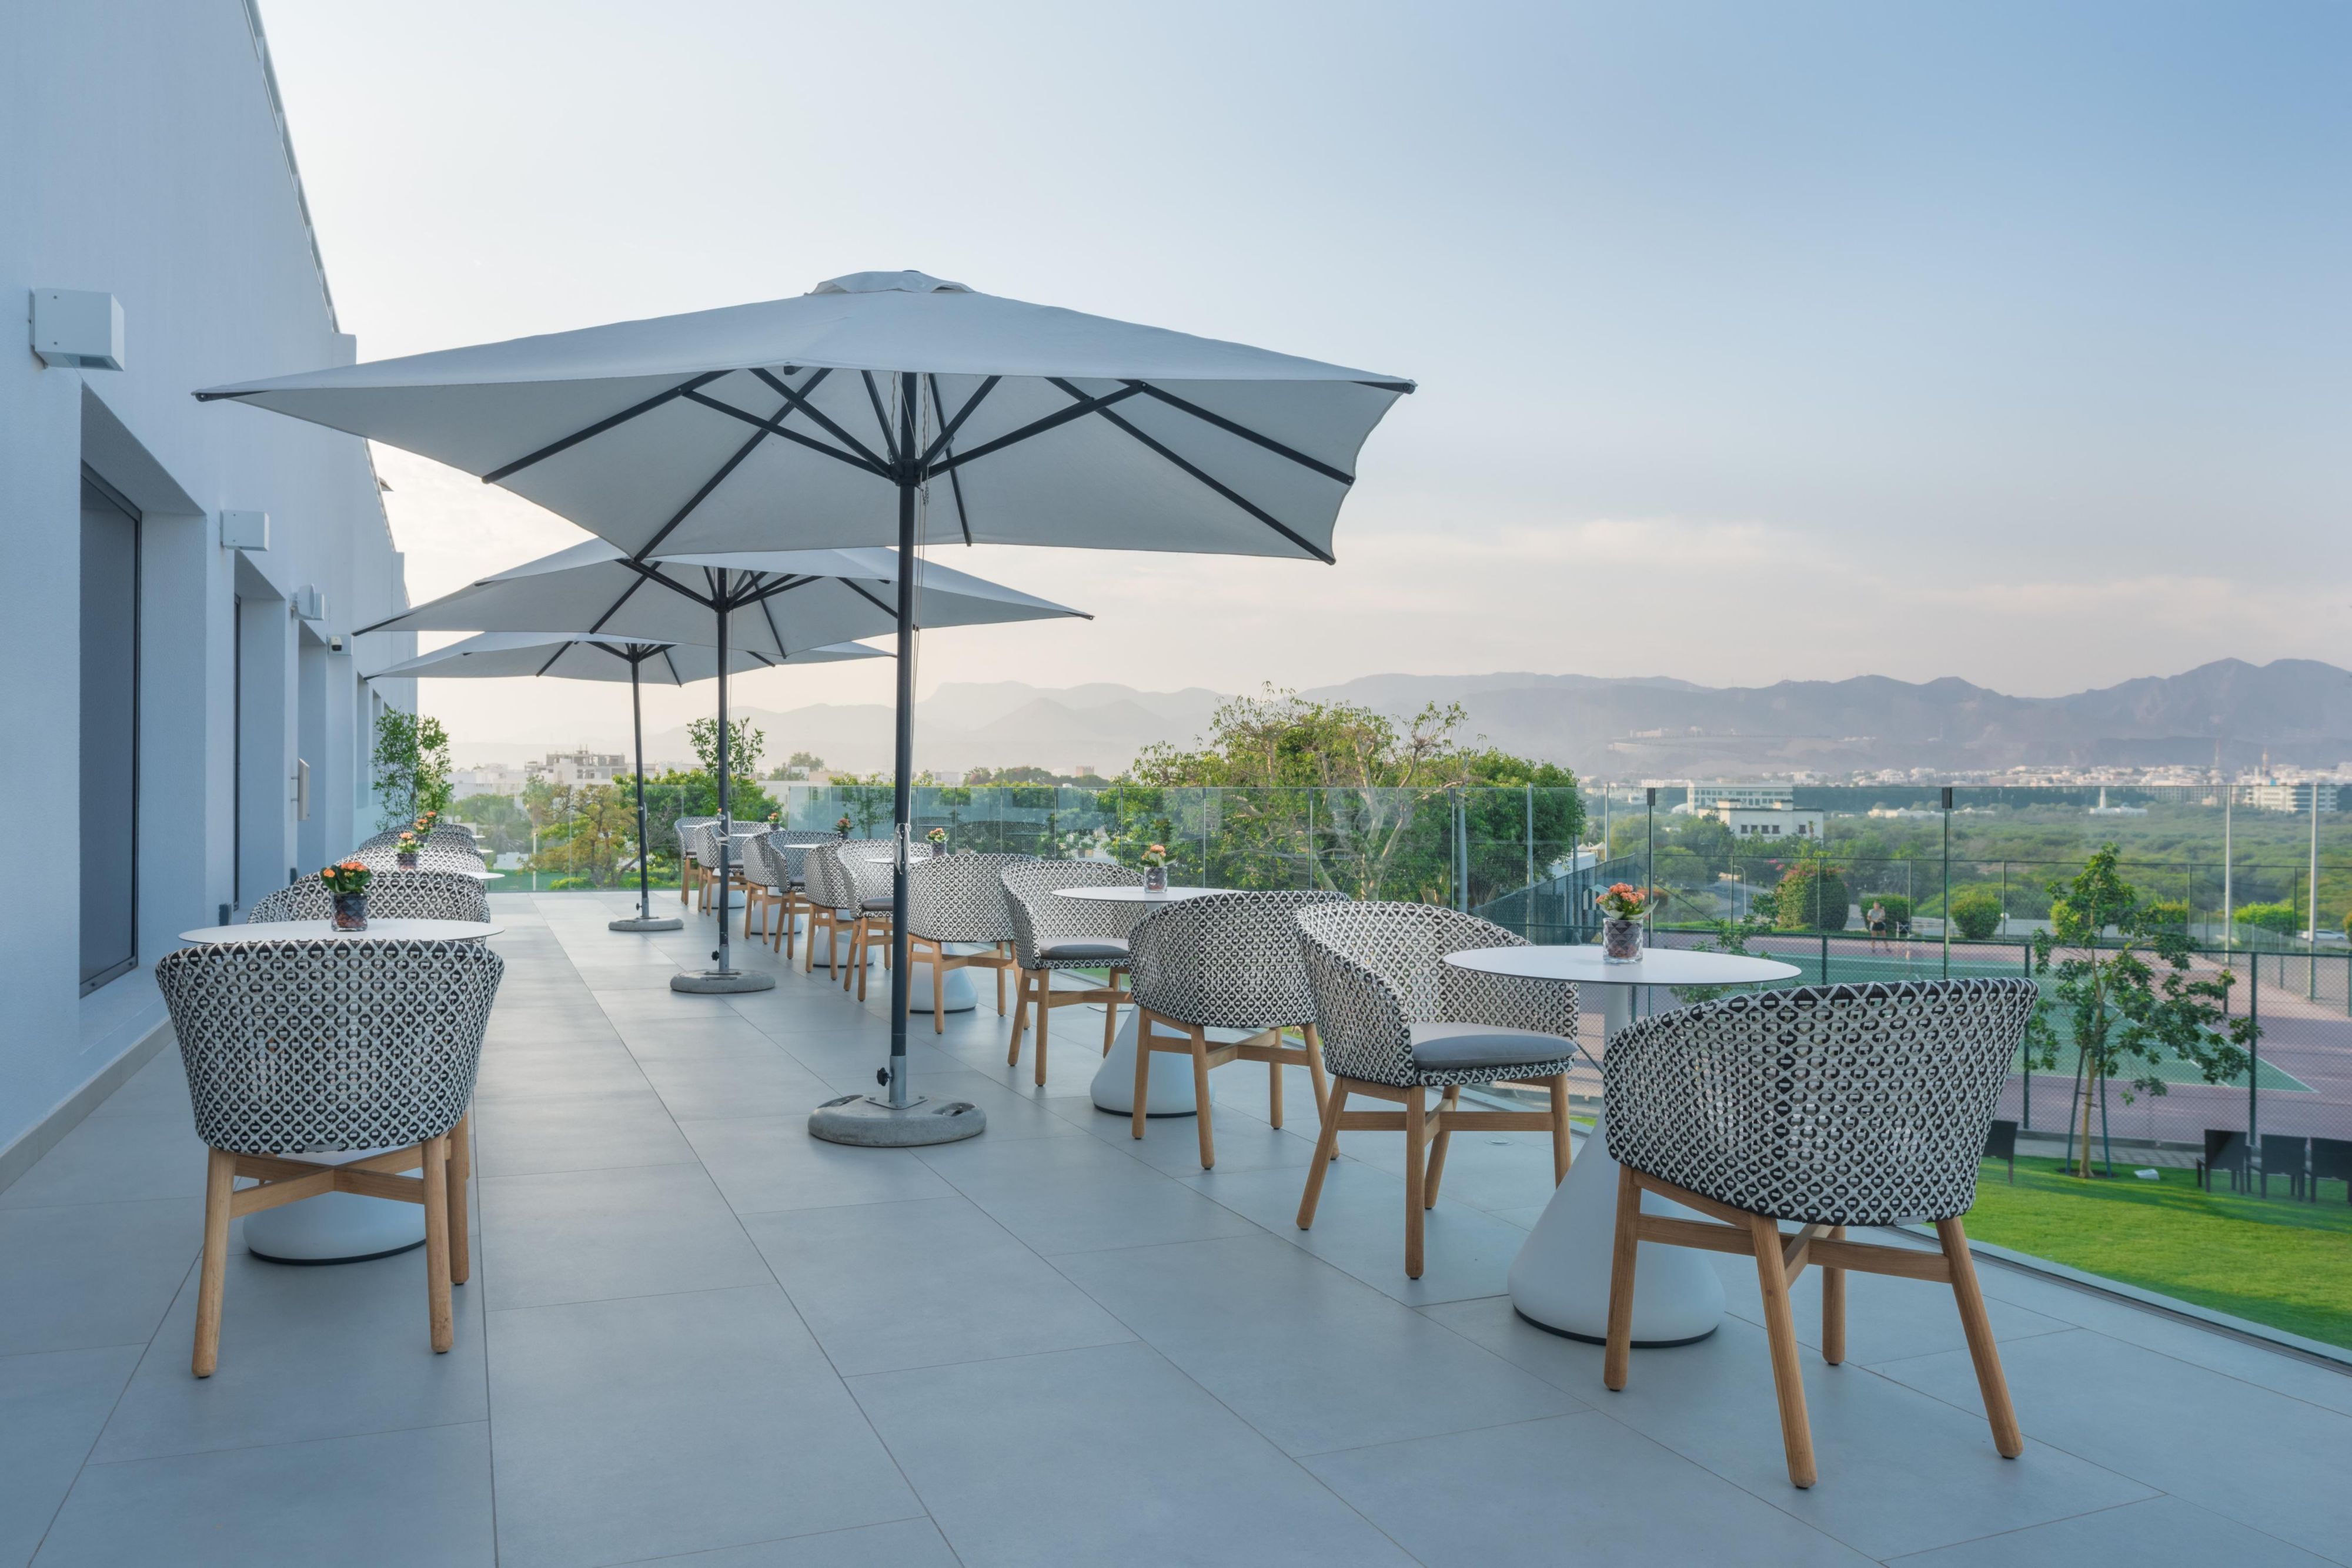 Qurum Tea Lounge Terrace with a stunning panoramic view